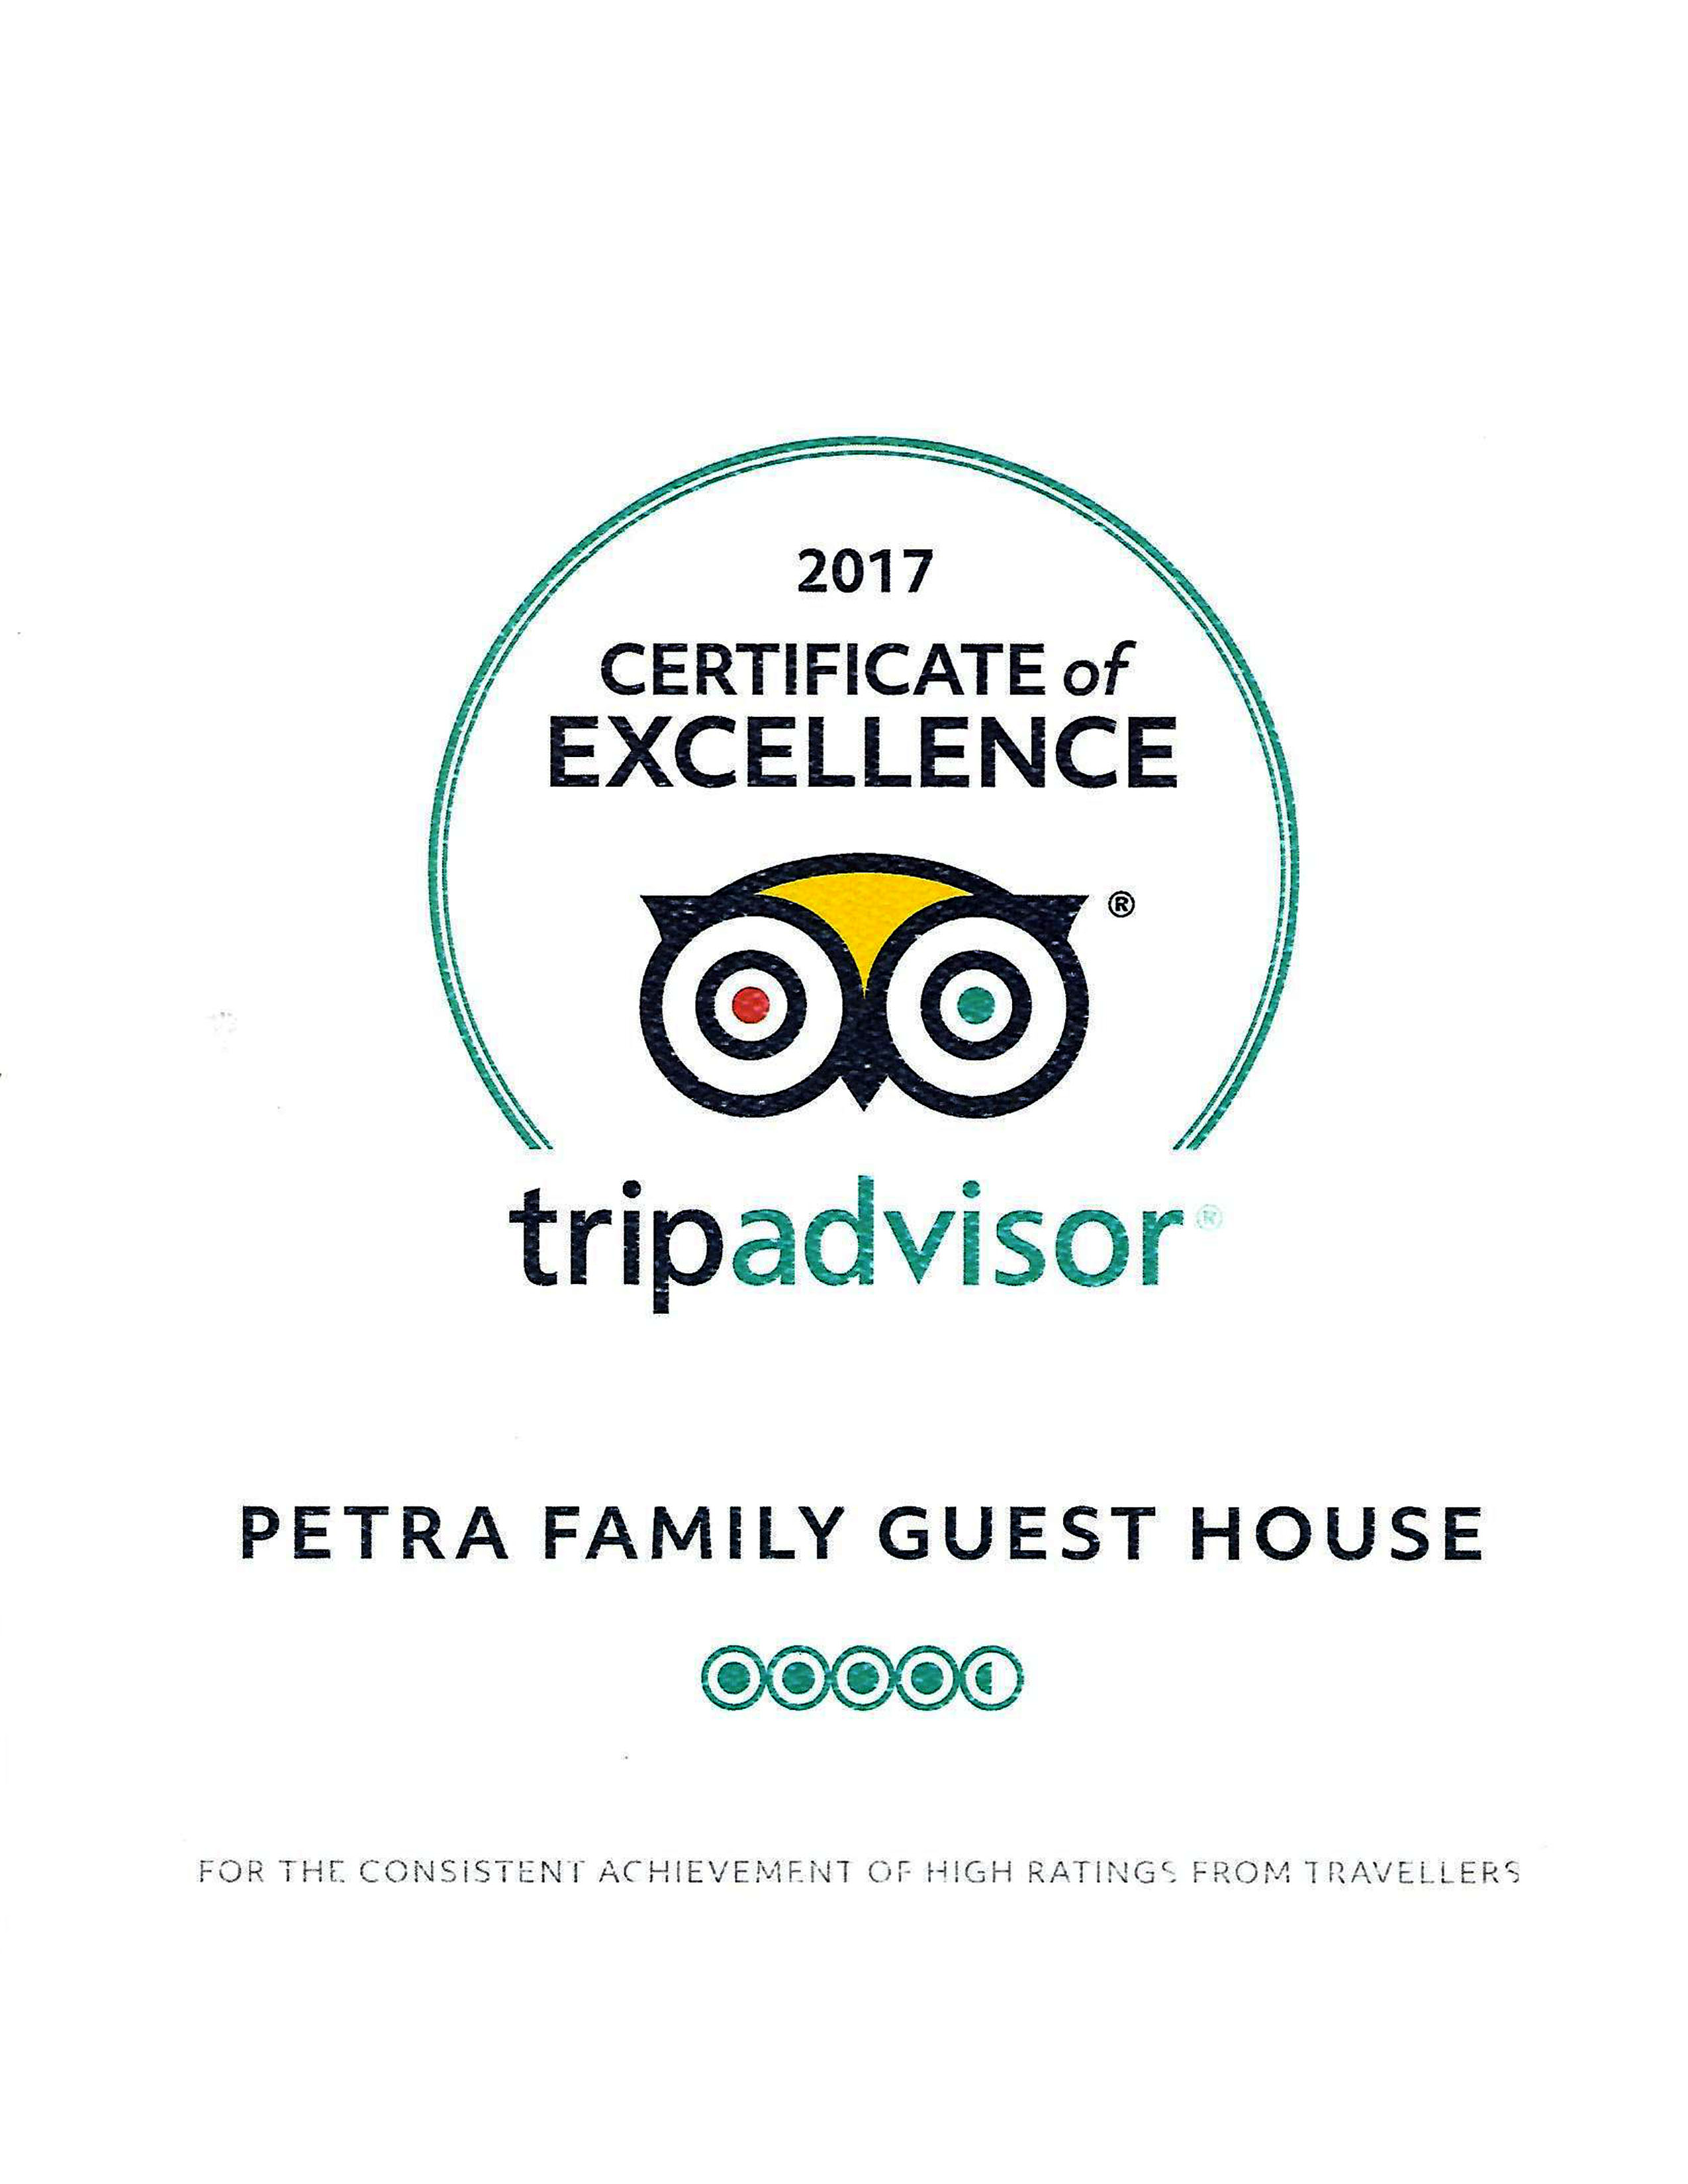 Petra Family Guest House